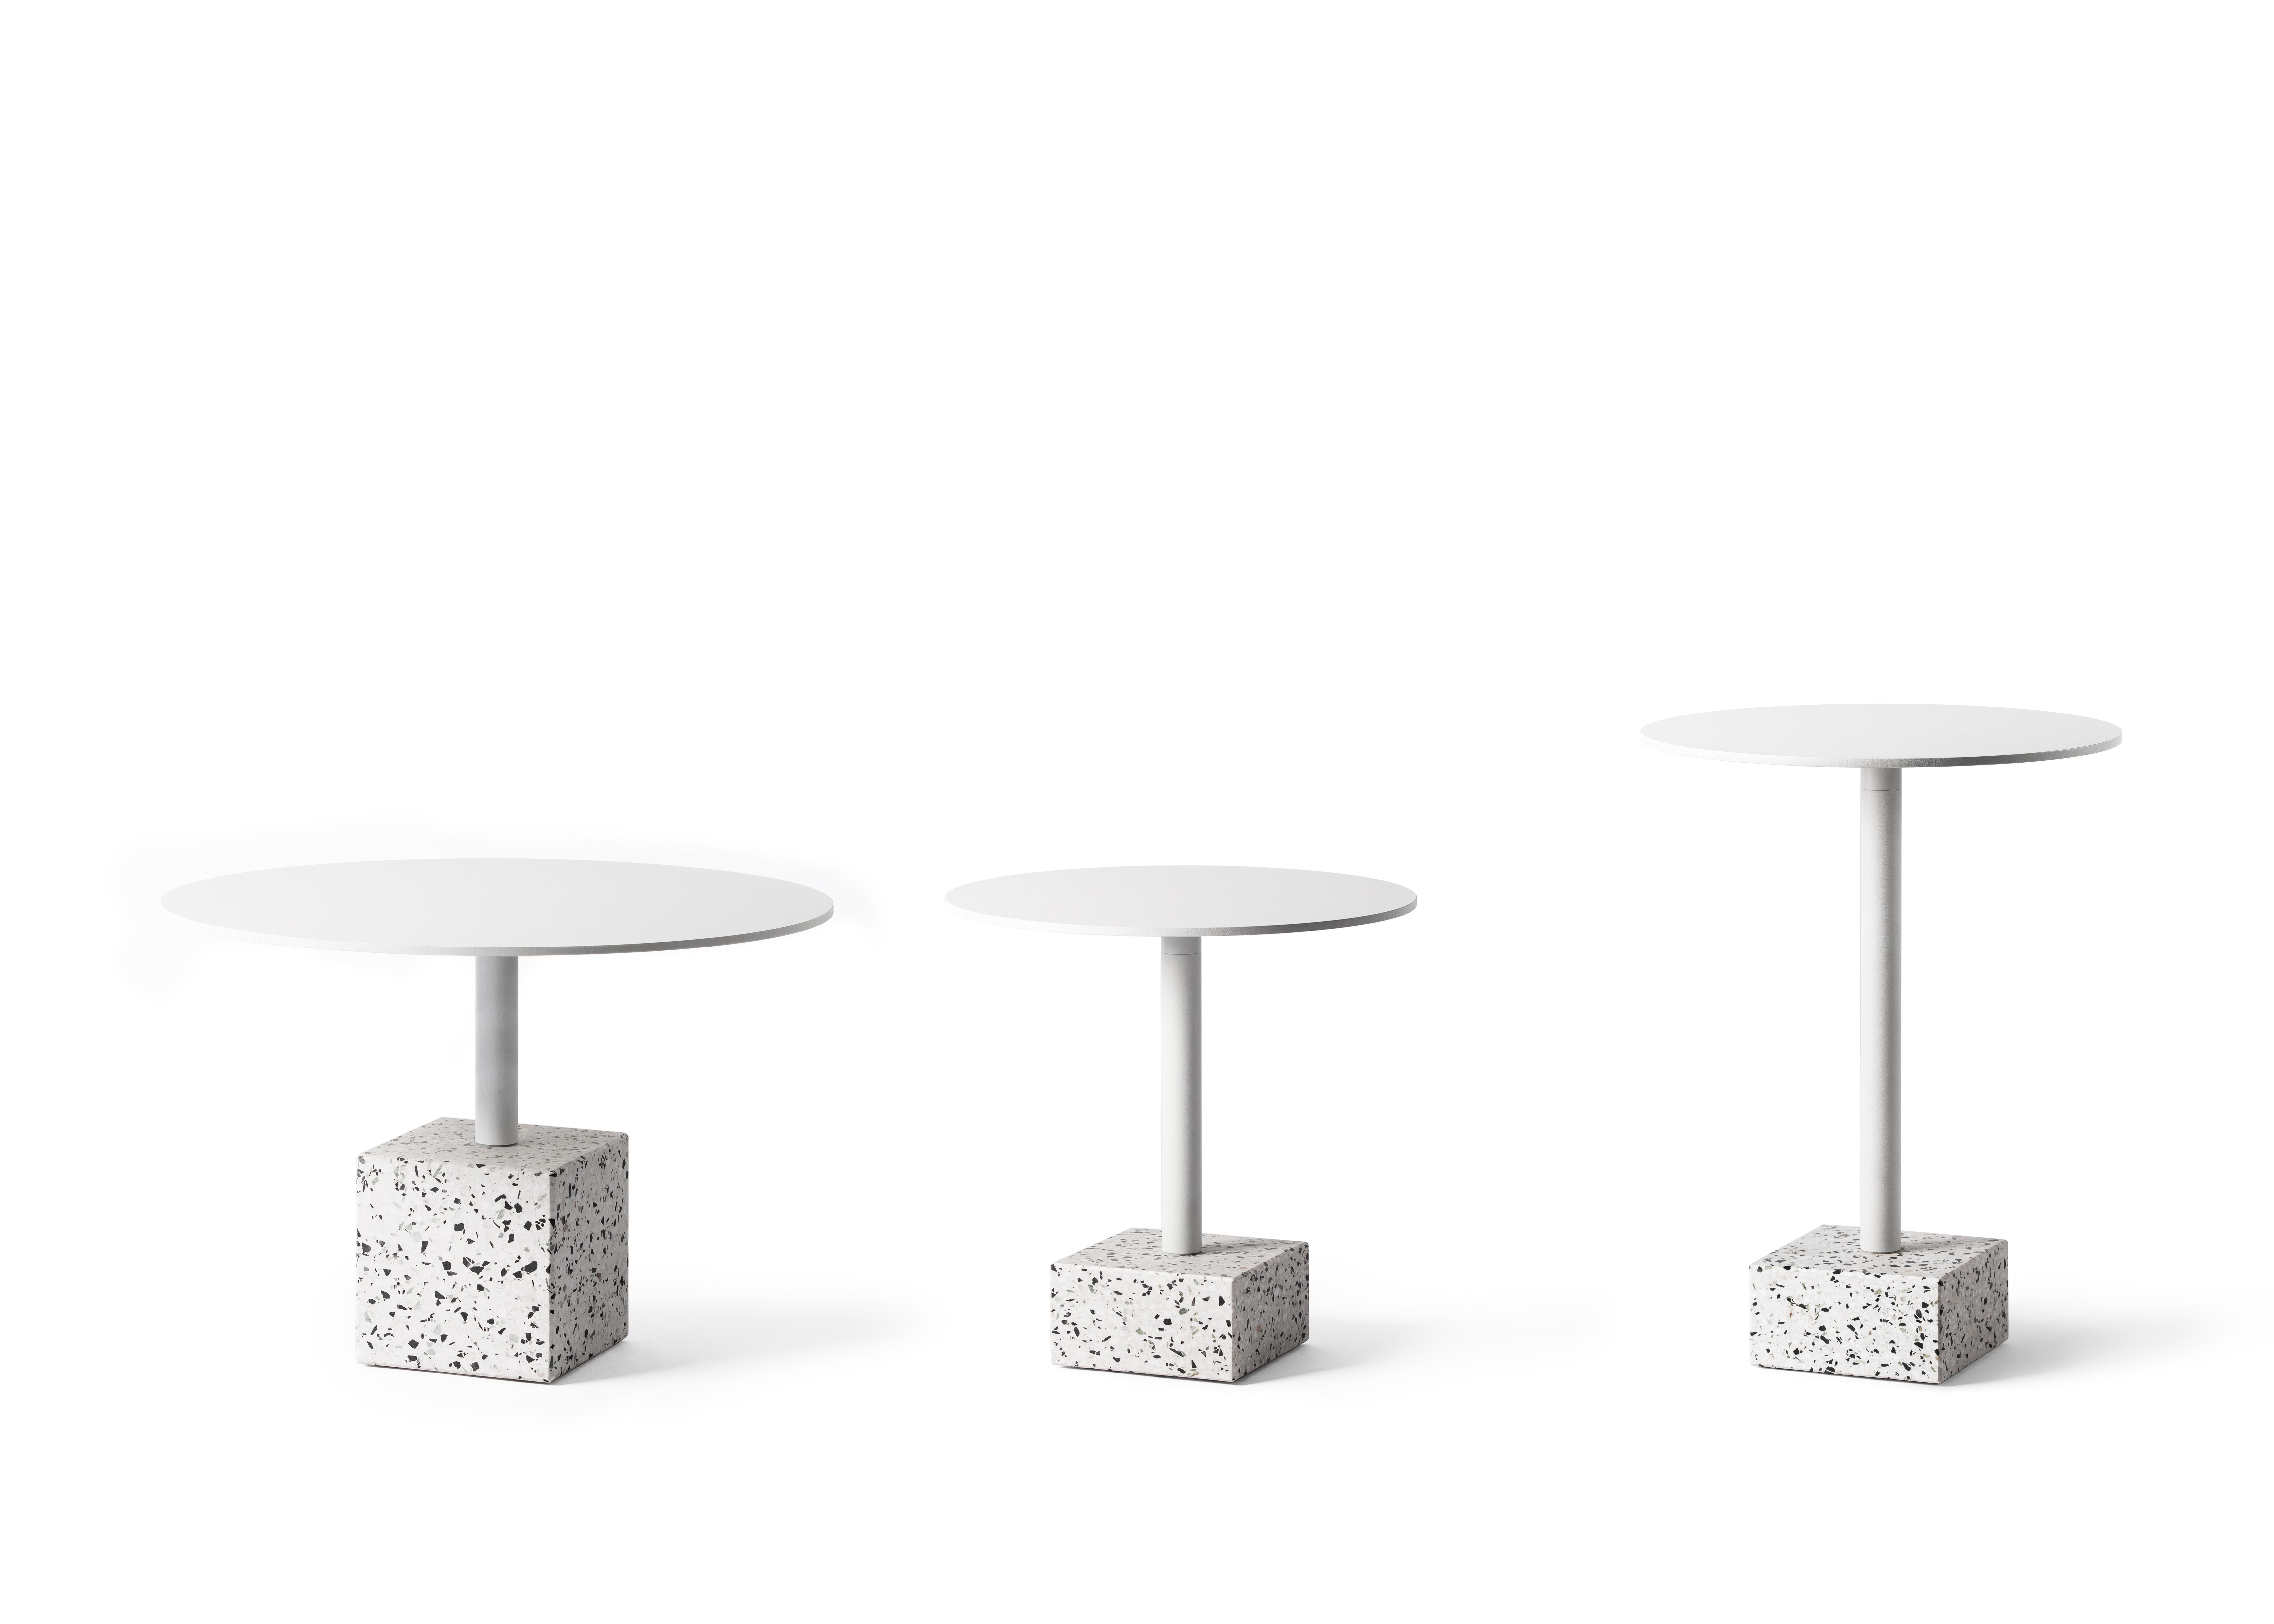 Material: Concrete, leftover stone aggregate, aluminum
Size: Ø 600 x H 440 mm
Weight: 22 kg
Color: Black / white
Accessory color: Black / white

About the artist/ designer:
Bentu's furniture derives its uniqueness from the simplicity of its